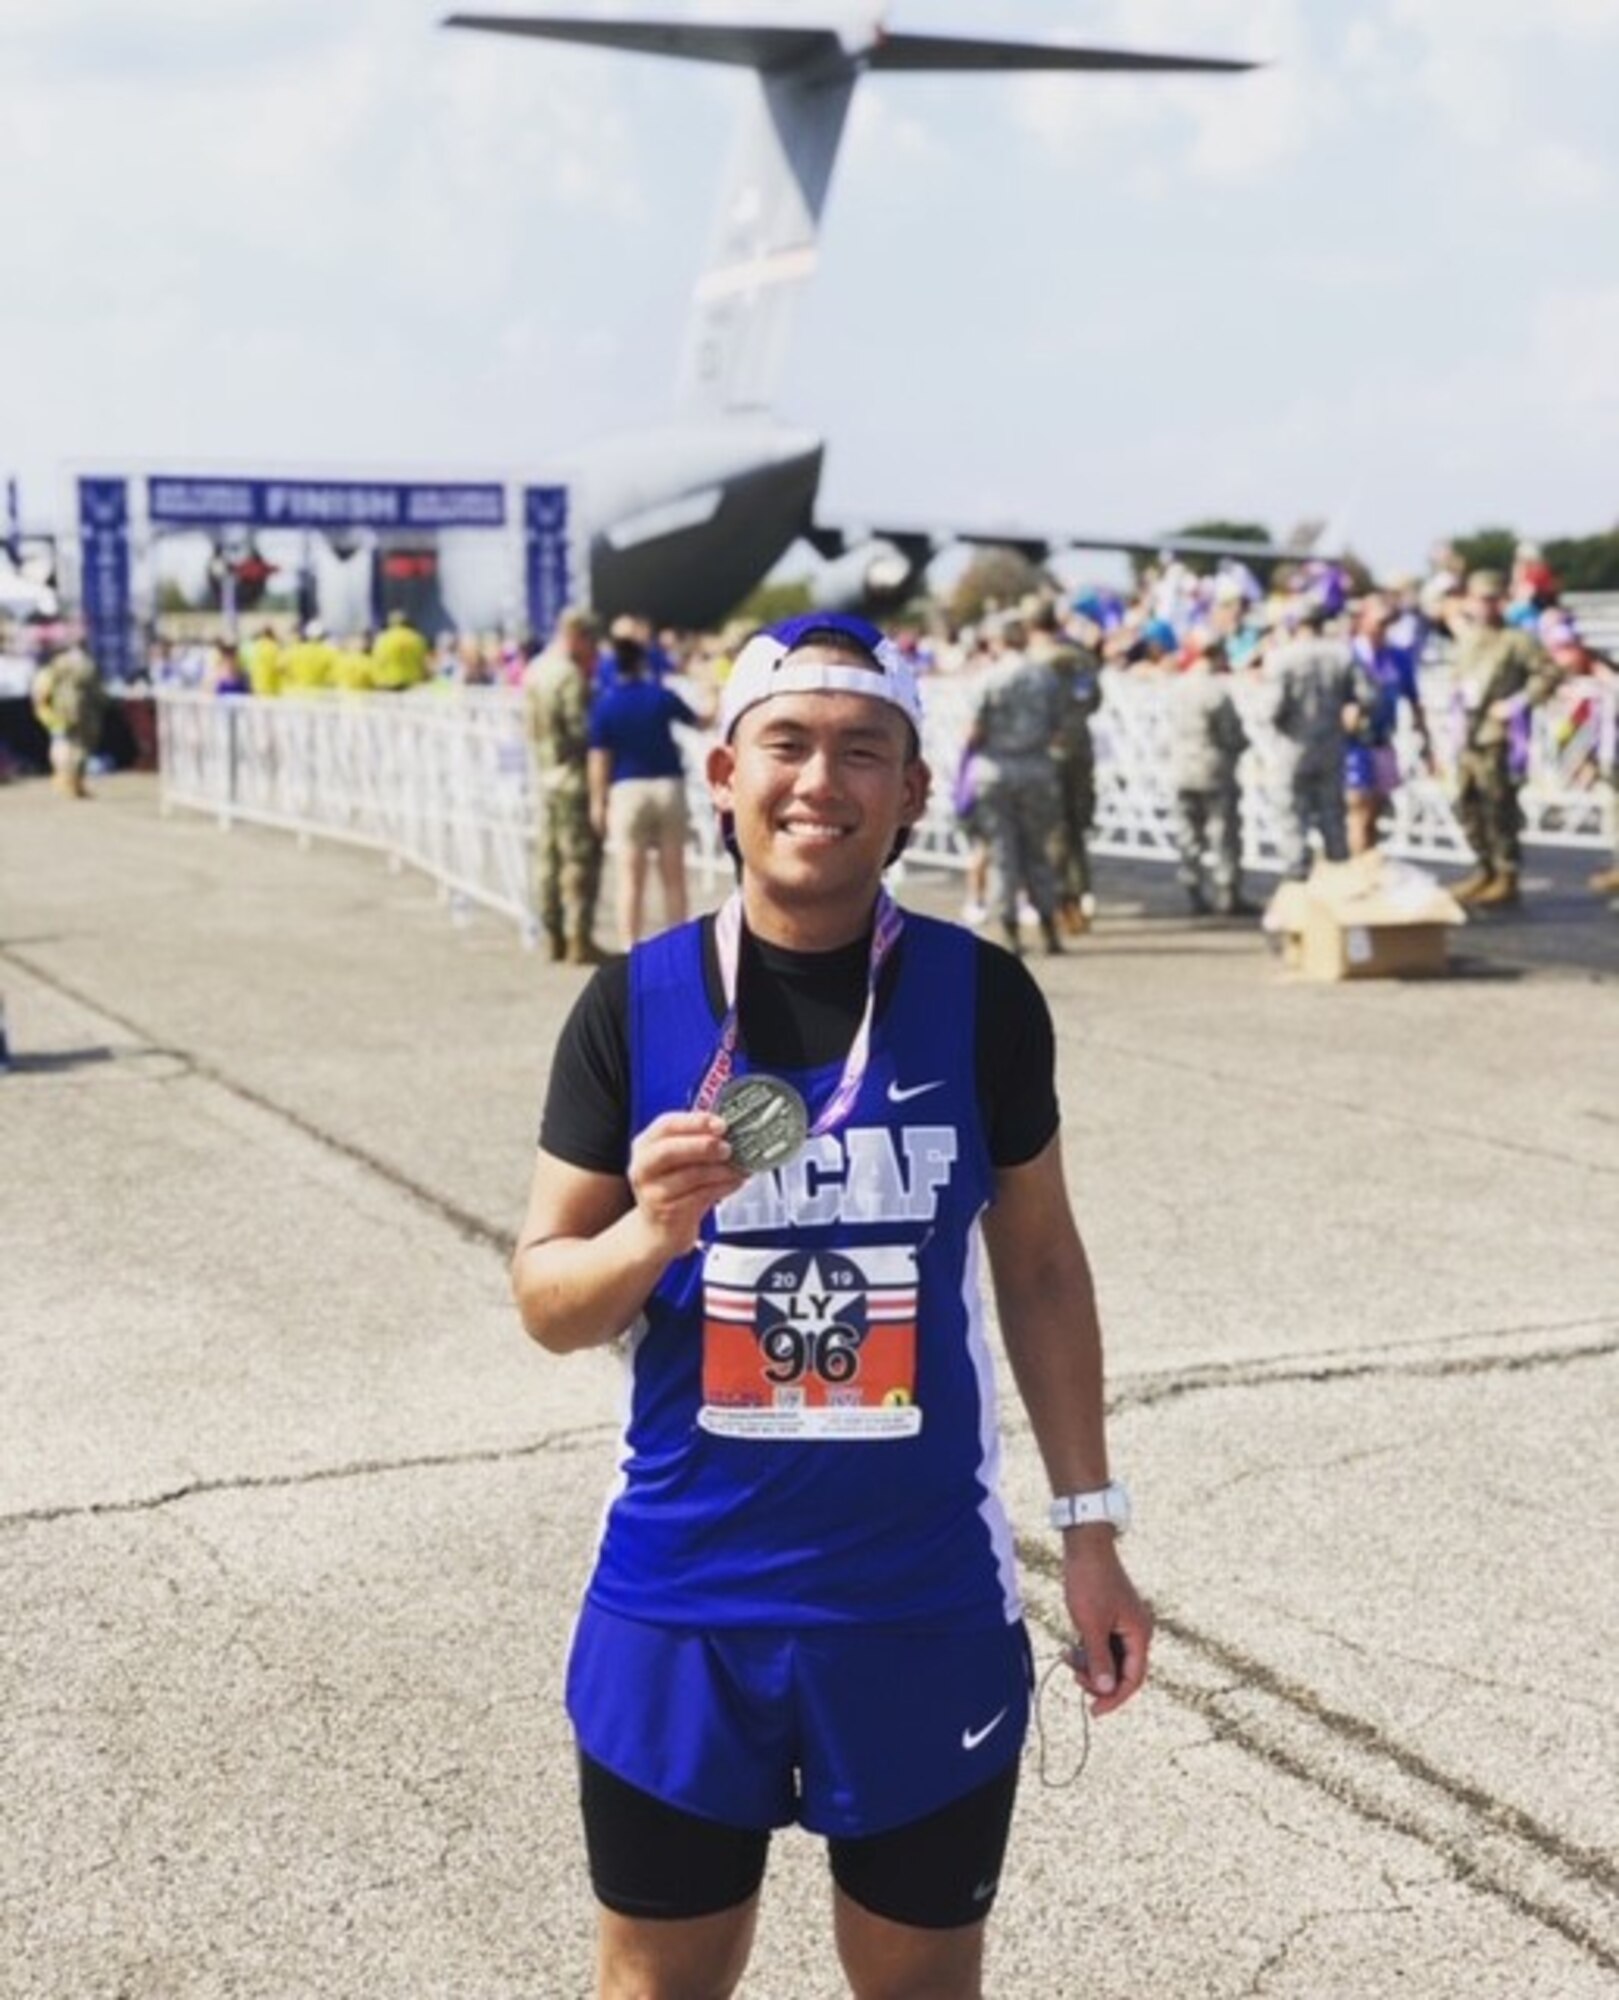 U.S. Air Force Staff Sgt. Daniel Ly, 8th Force Support Squadron customer support noncommissioned officer in charge, poses with his medal after completing the Air Force Marathon at Wright-Patterson Air Force Base, Ohio, Sept. 21, 2019. Ly has been running since 8th grade and has competed in 17 full marathon races. (Courtesy photo)